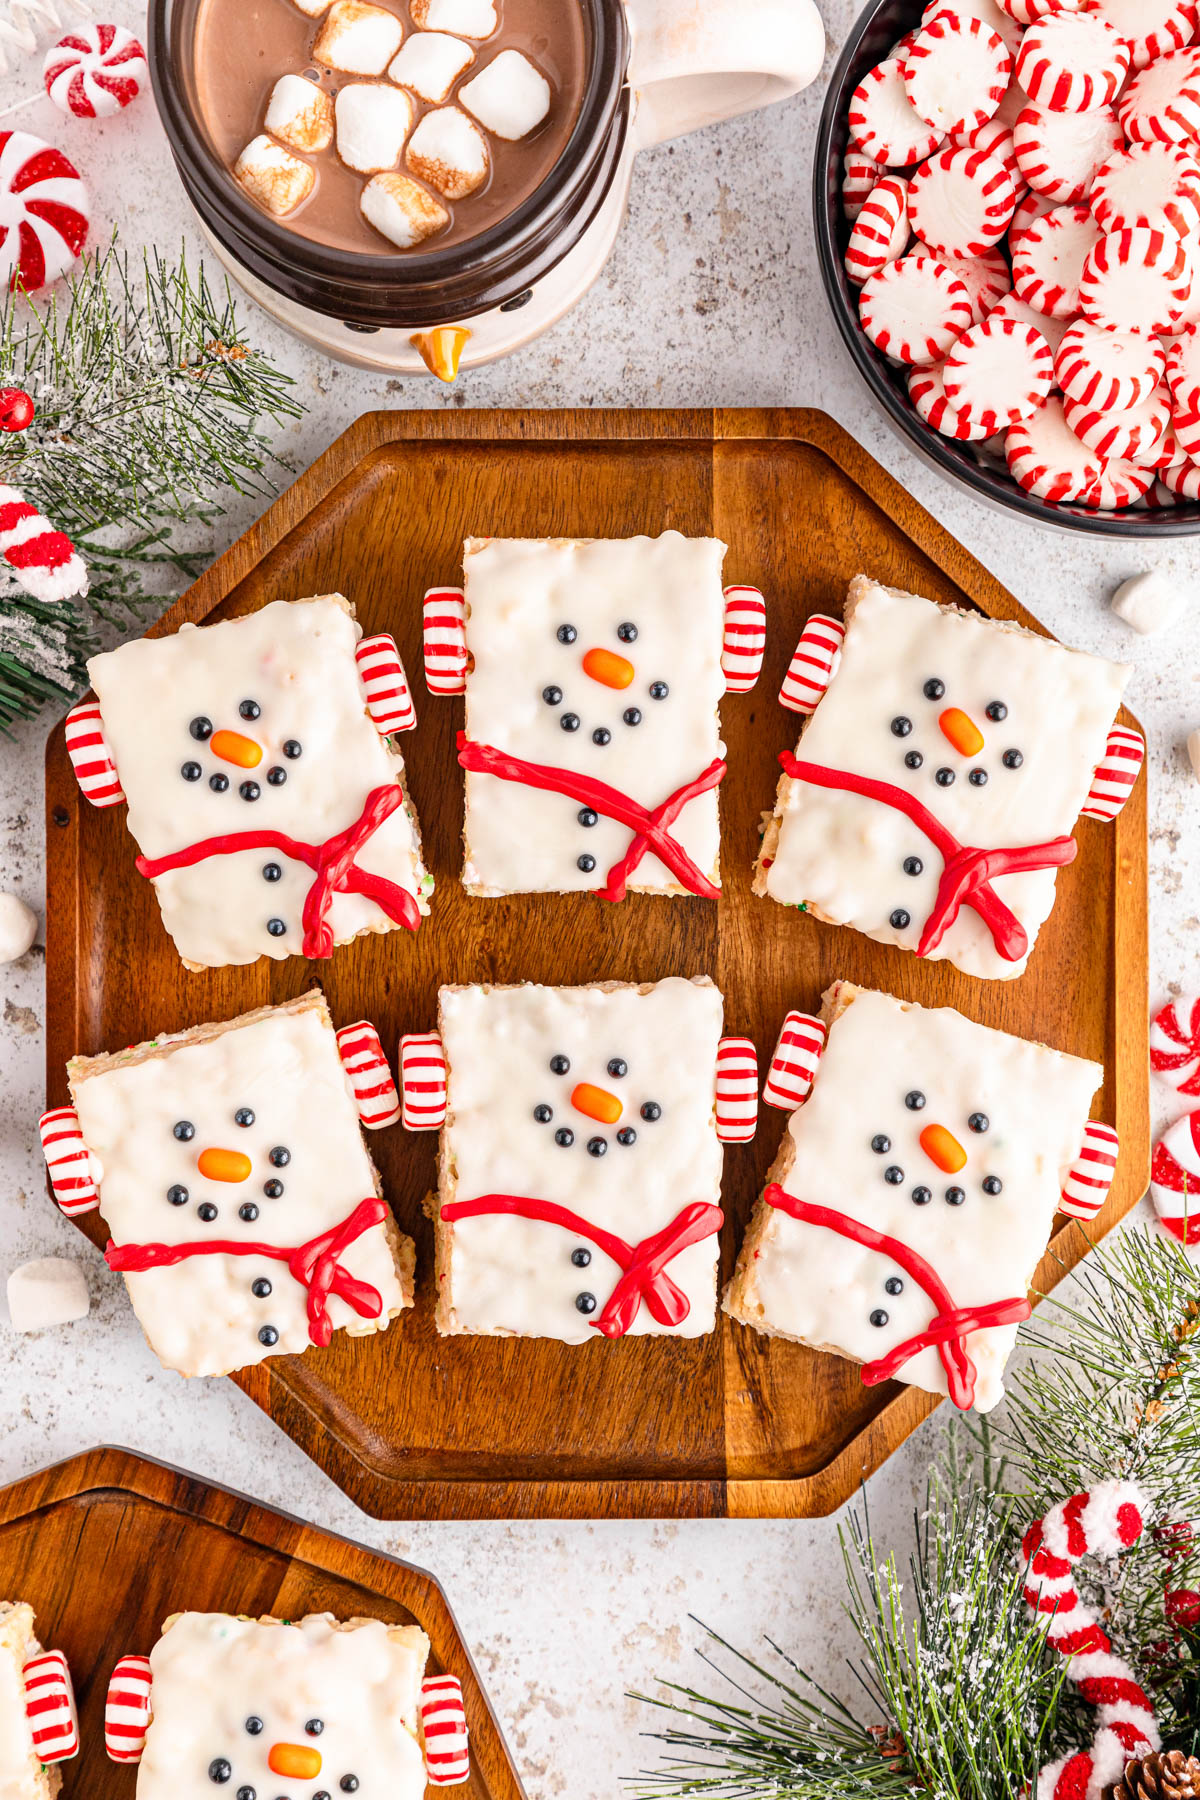 Snowman treats on a tray with peppermints